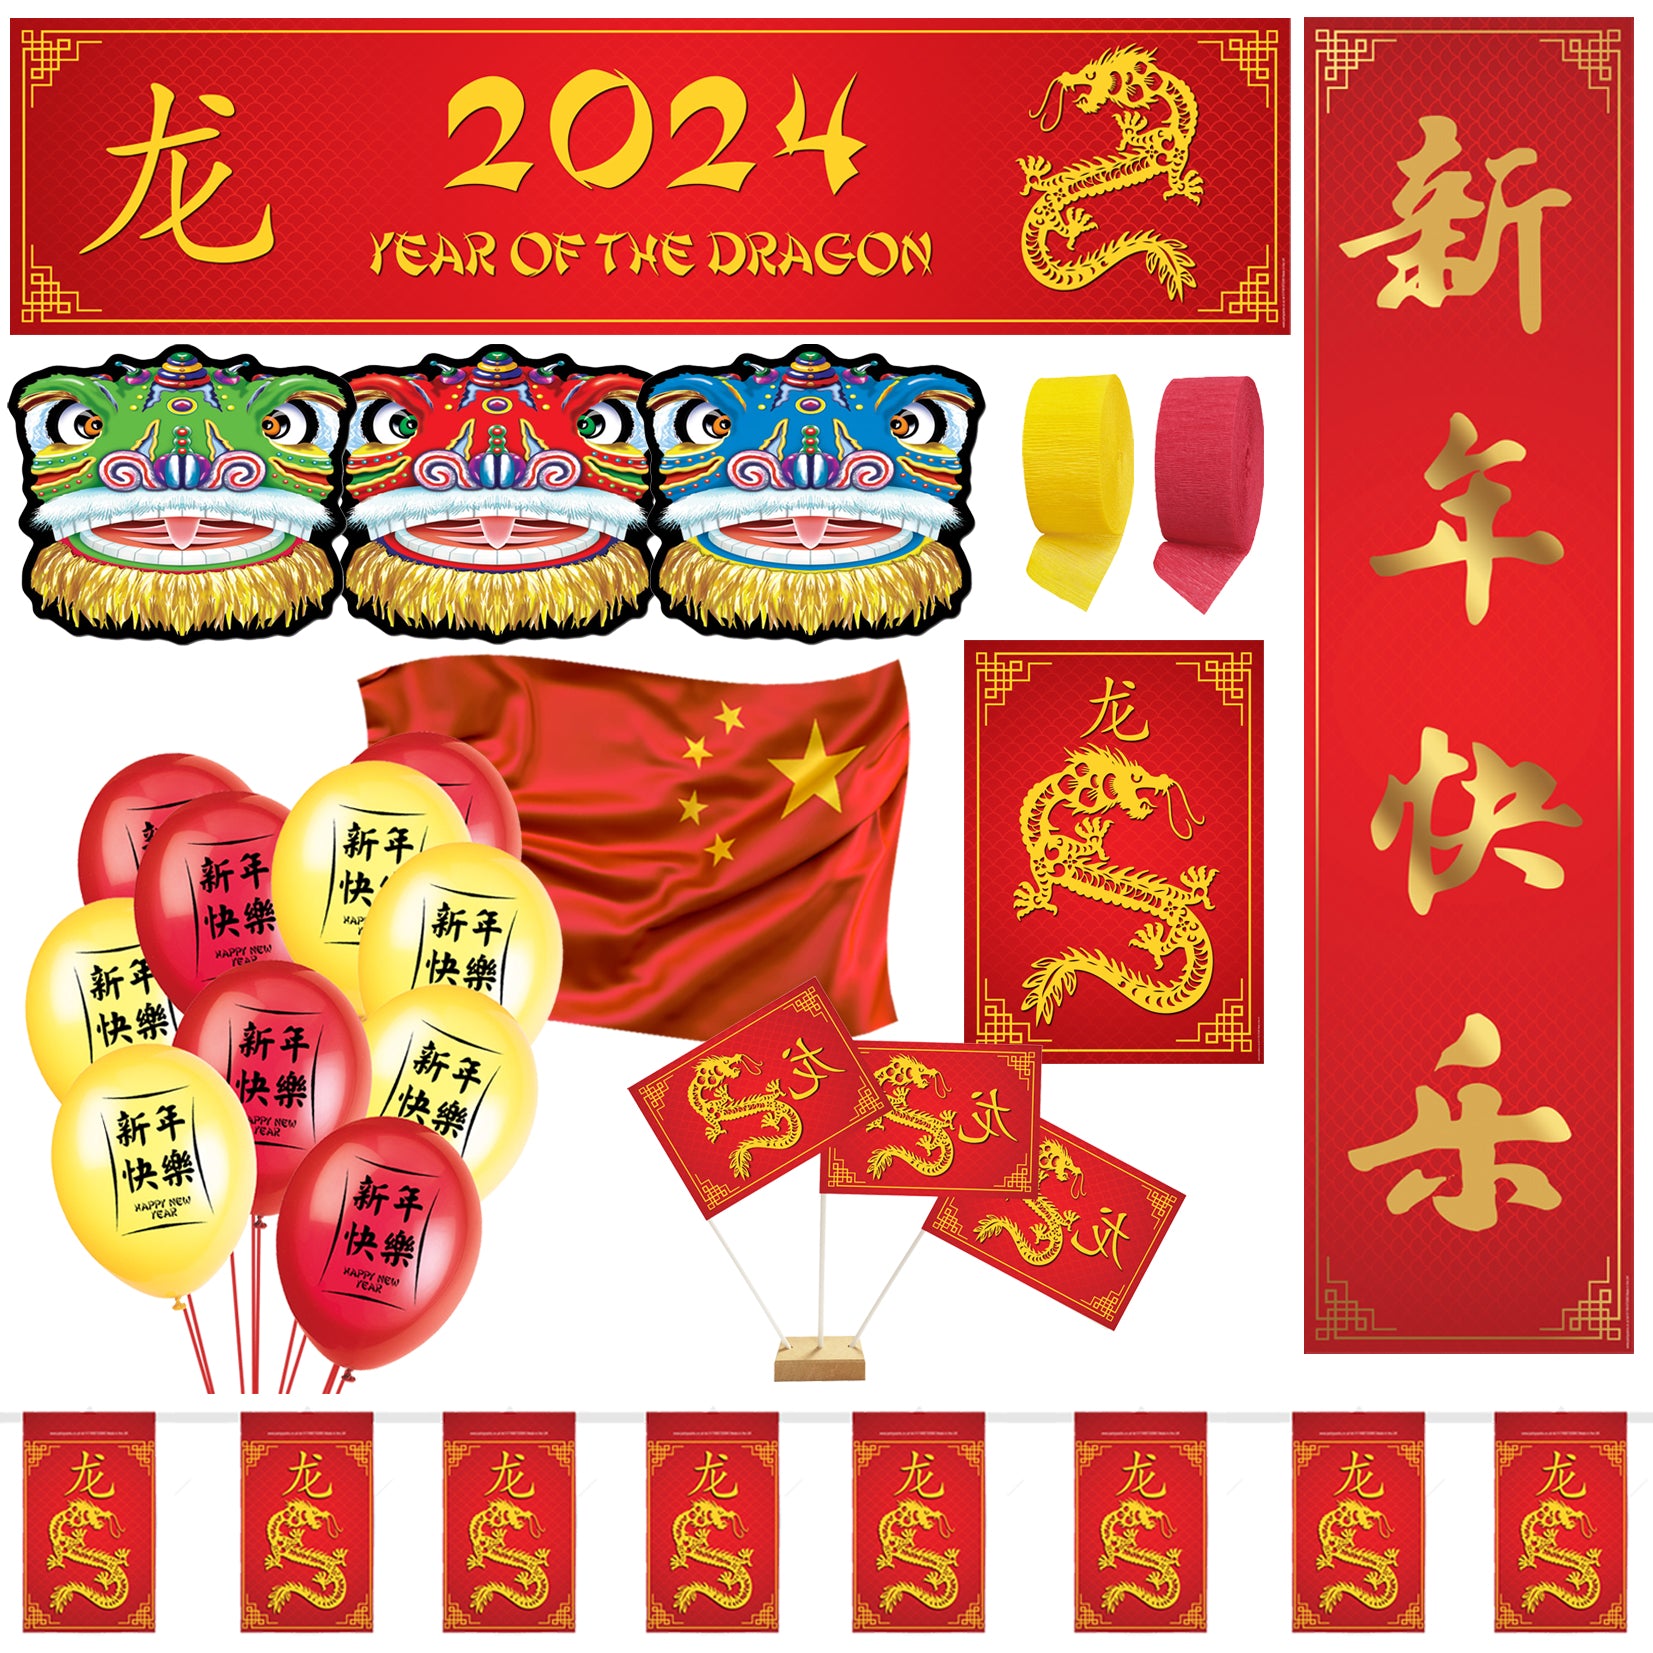 Elegant Chinese New Year party decoration using gold and red party